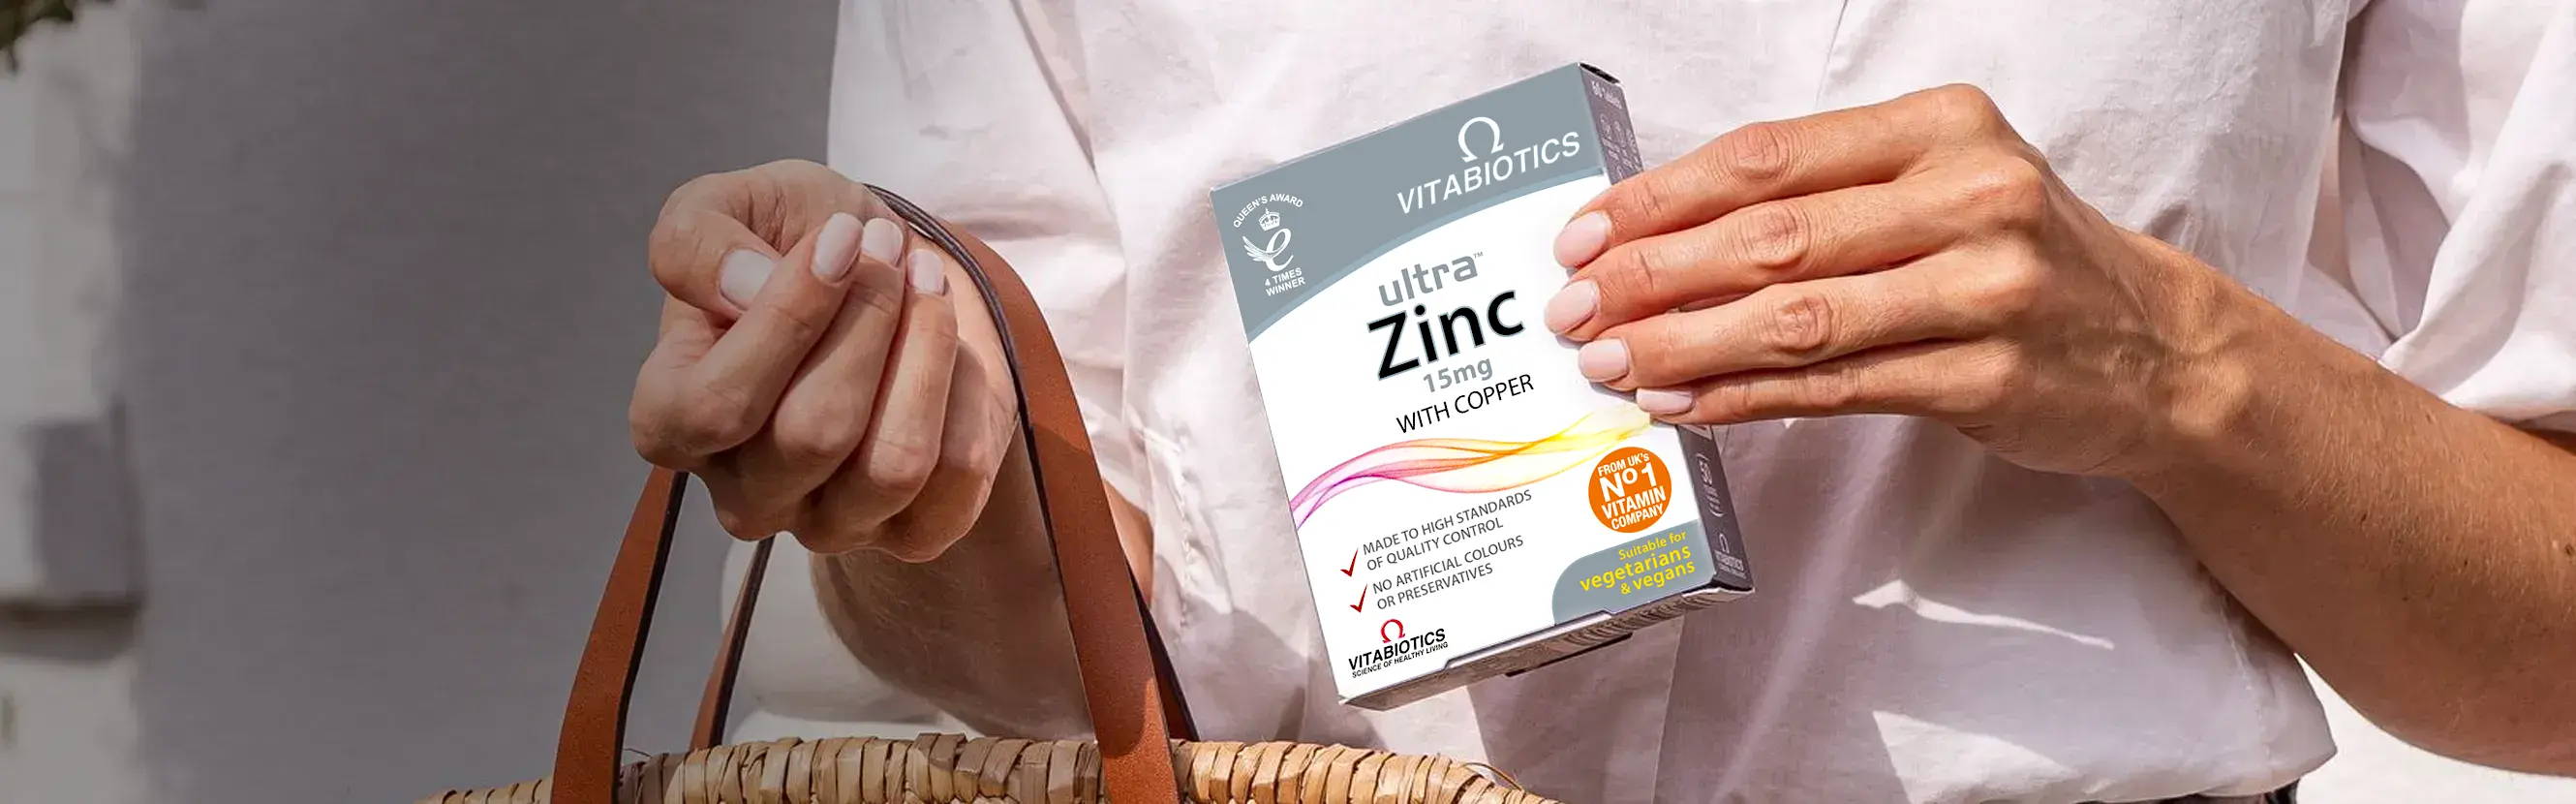  Good nutrition starts with balance. That’s why Ultra Zinc is a specially formulated blend of nutrients, zinc and copper that work together in a single source, made to the highest quality standards. 